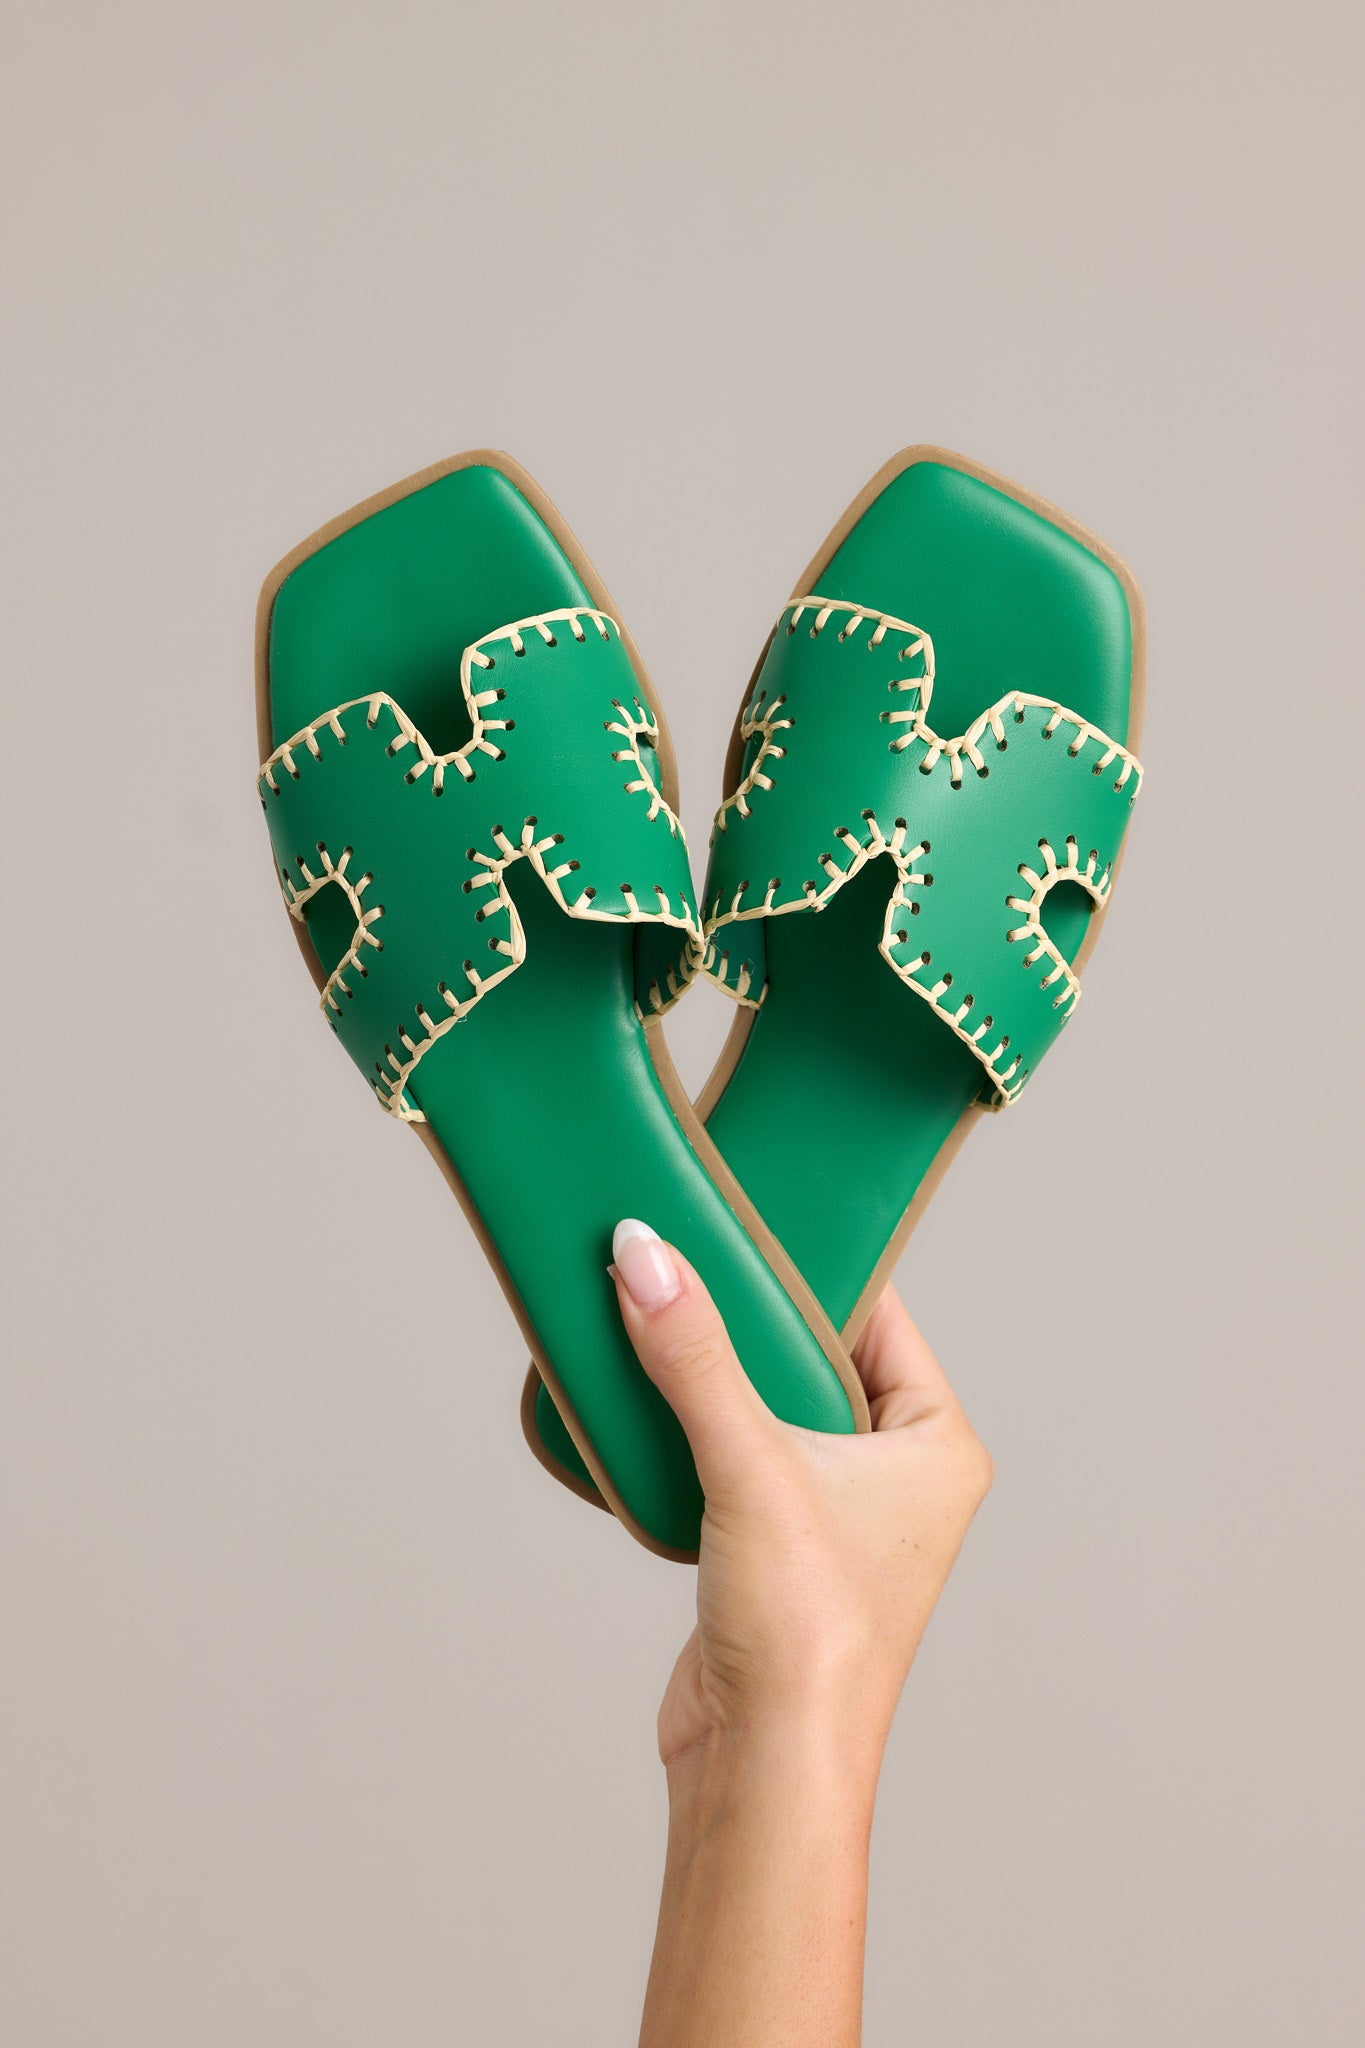 These green sandals feature a square toe, a slip on design, a strap with cutouts over the top of the foot beige stitch detailing, and a high contrasting sole.